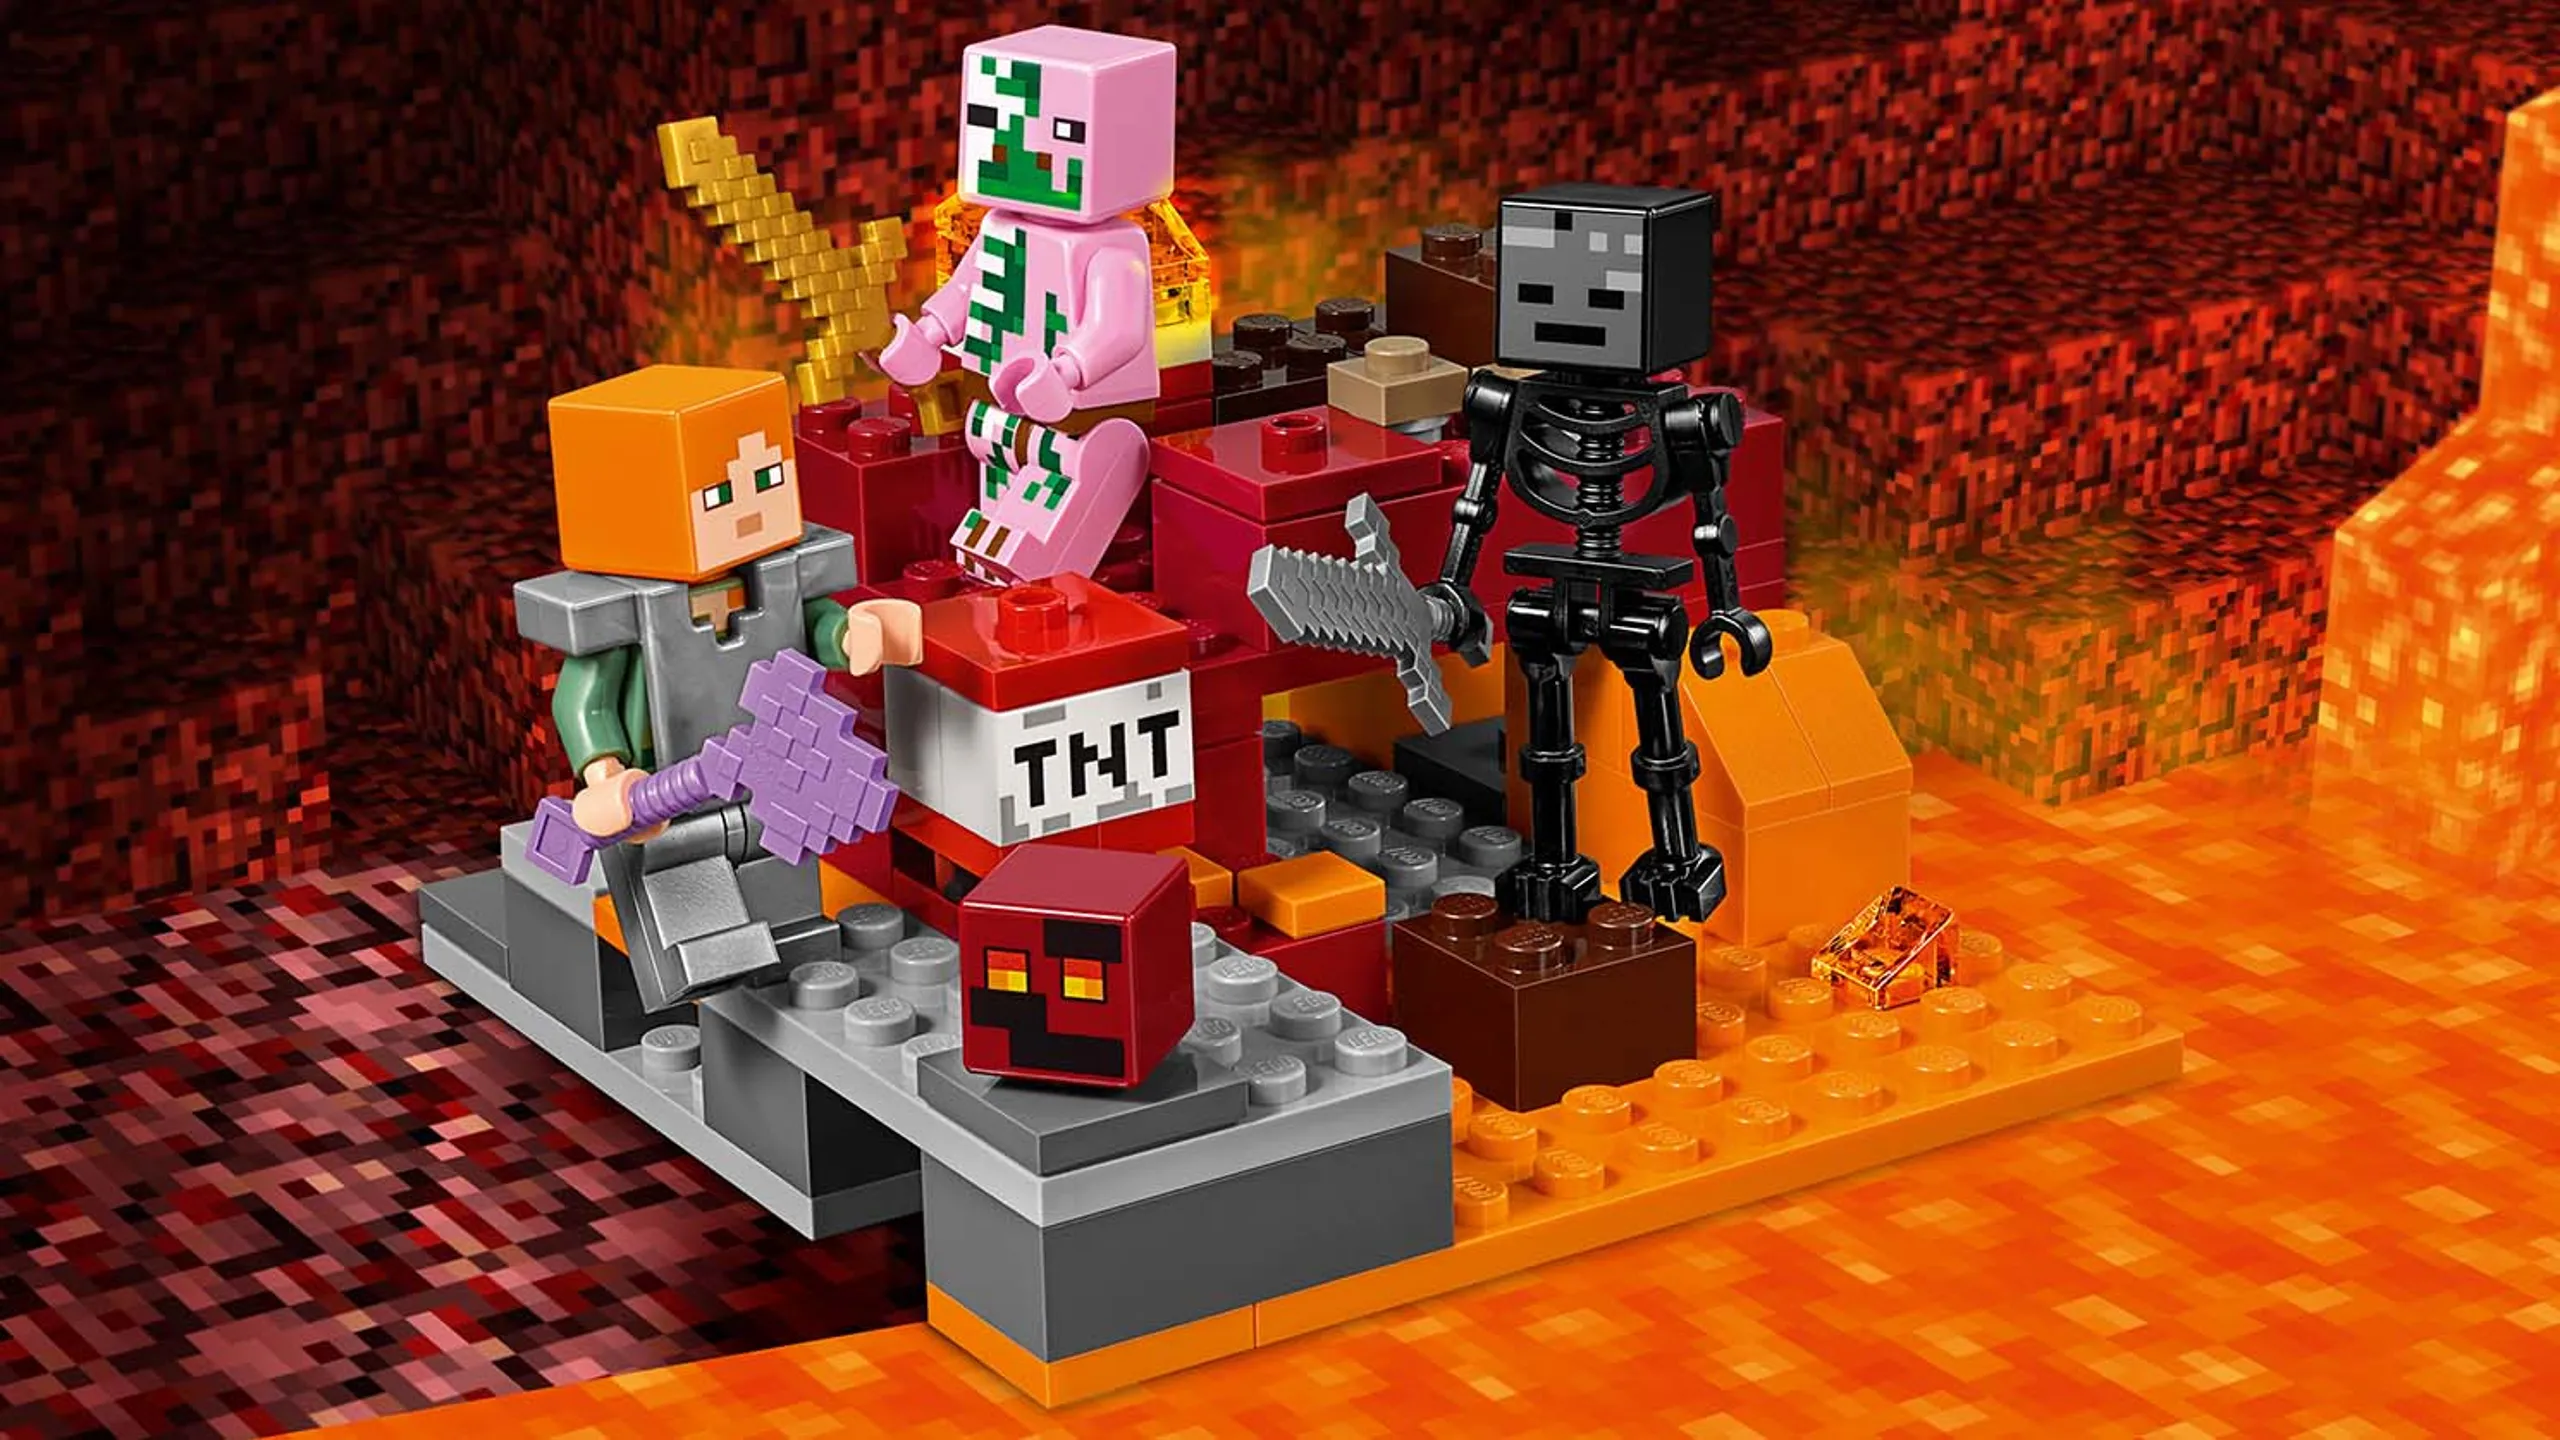 LEGO Minecraft - 21139 The Nether Fight - Alex has put on his iron armor and fight the zombie pigman, the wither skeleton and jumping magma cubes in the Nether.